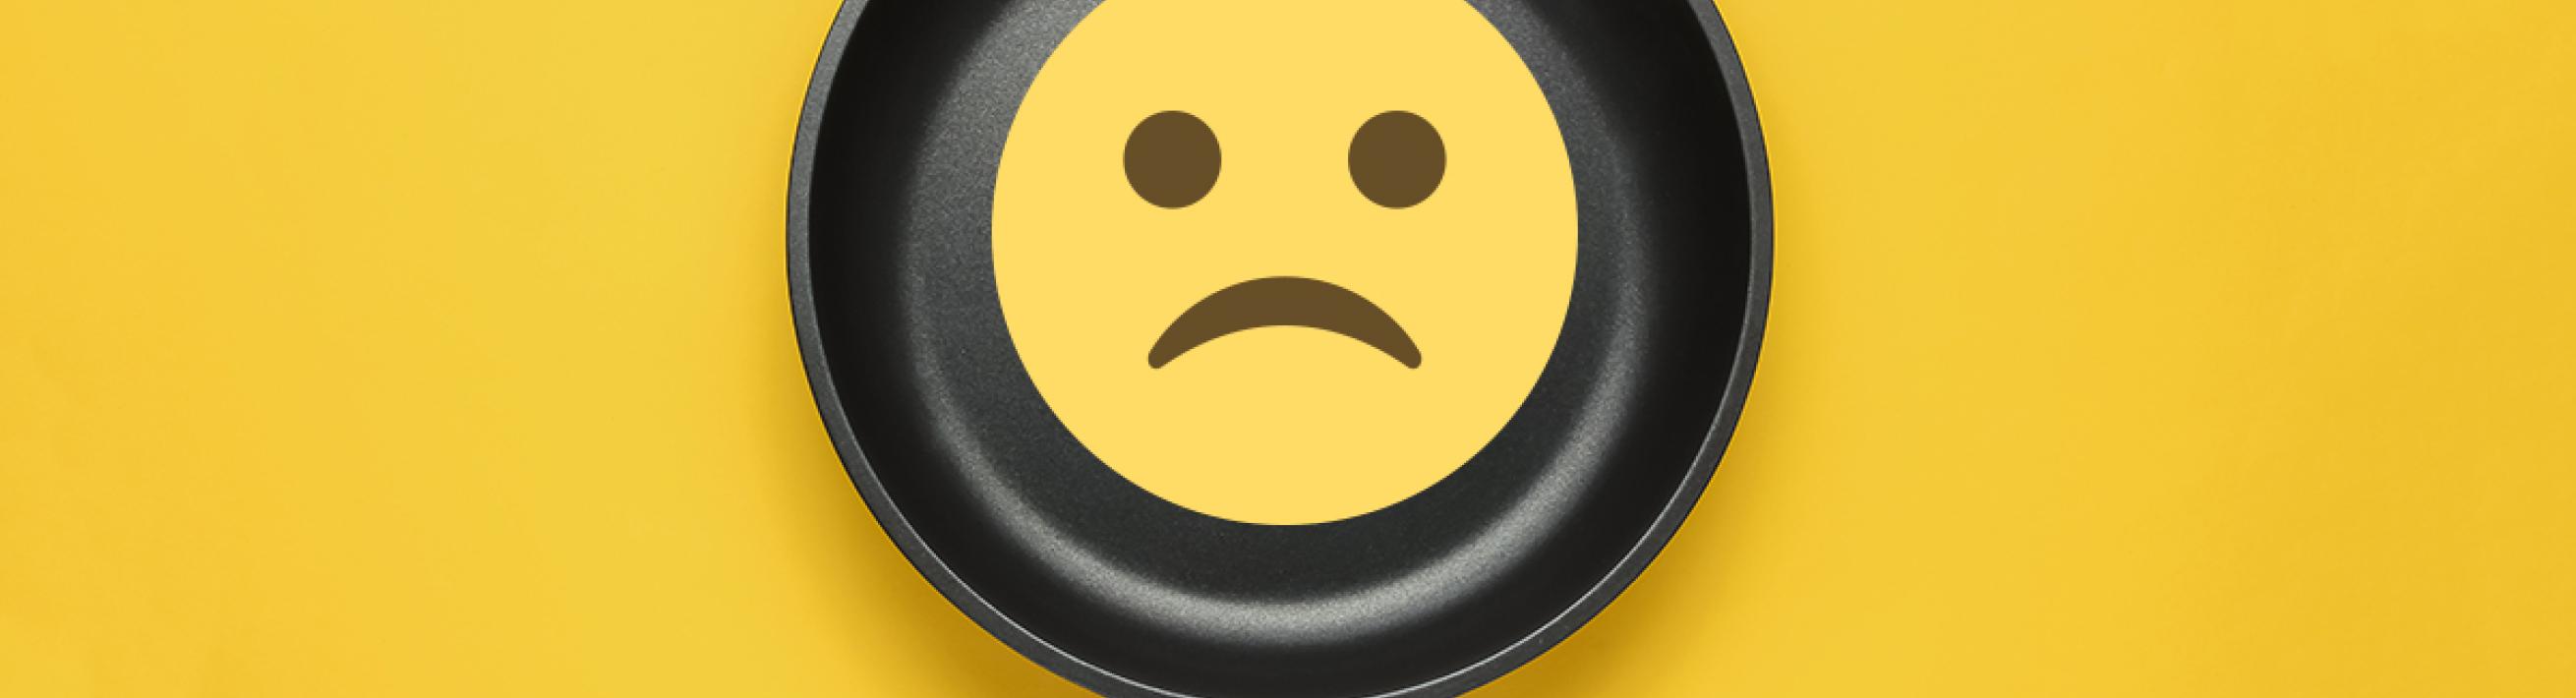 Still Cooking: An Update on Toxic PFAS in Cookware Products